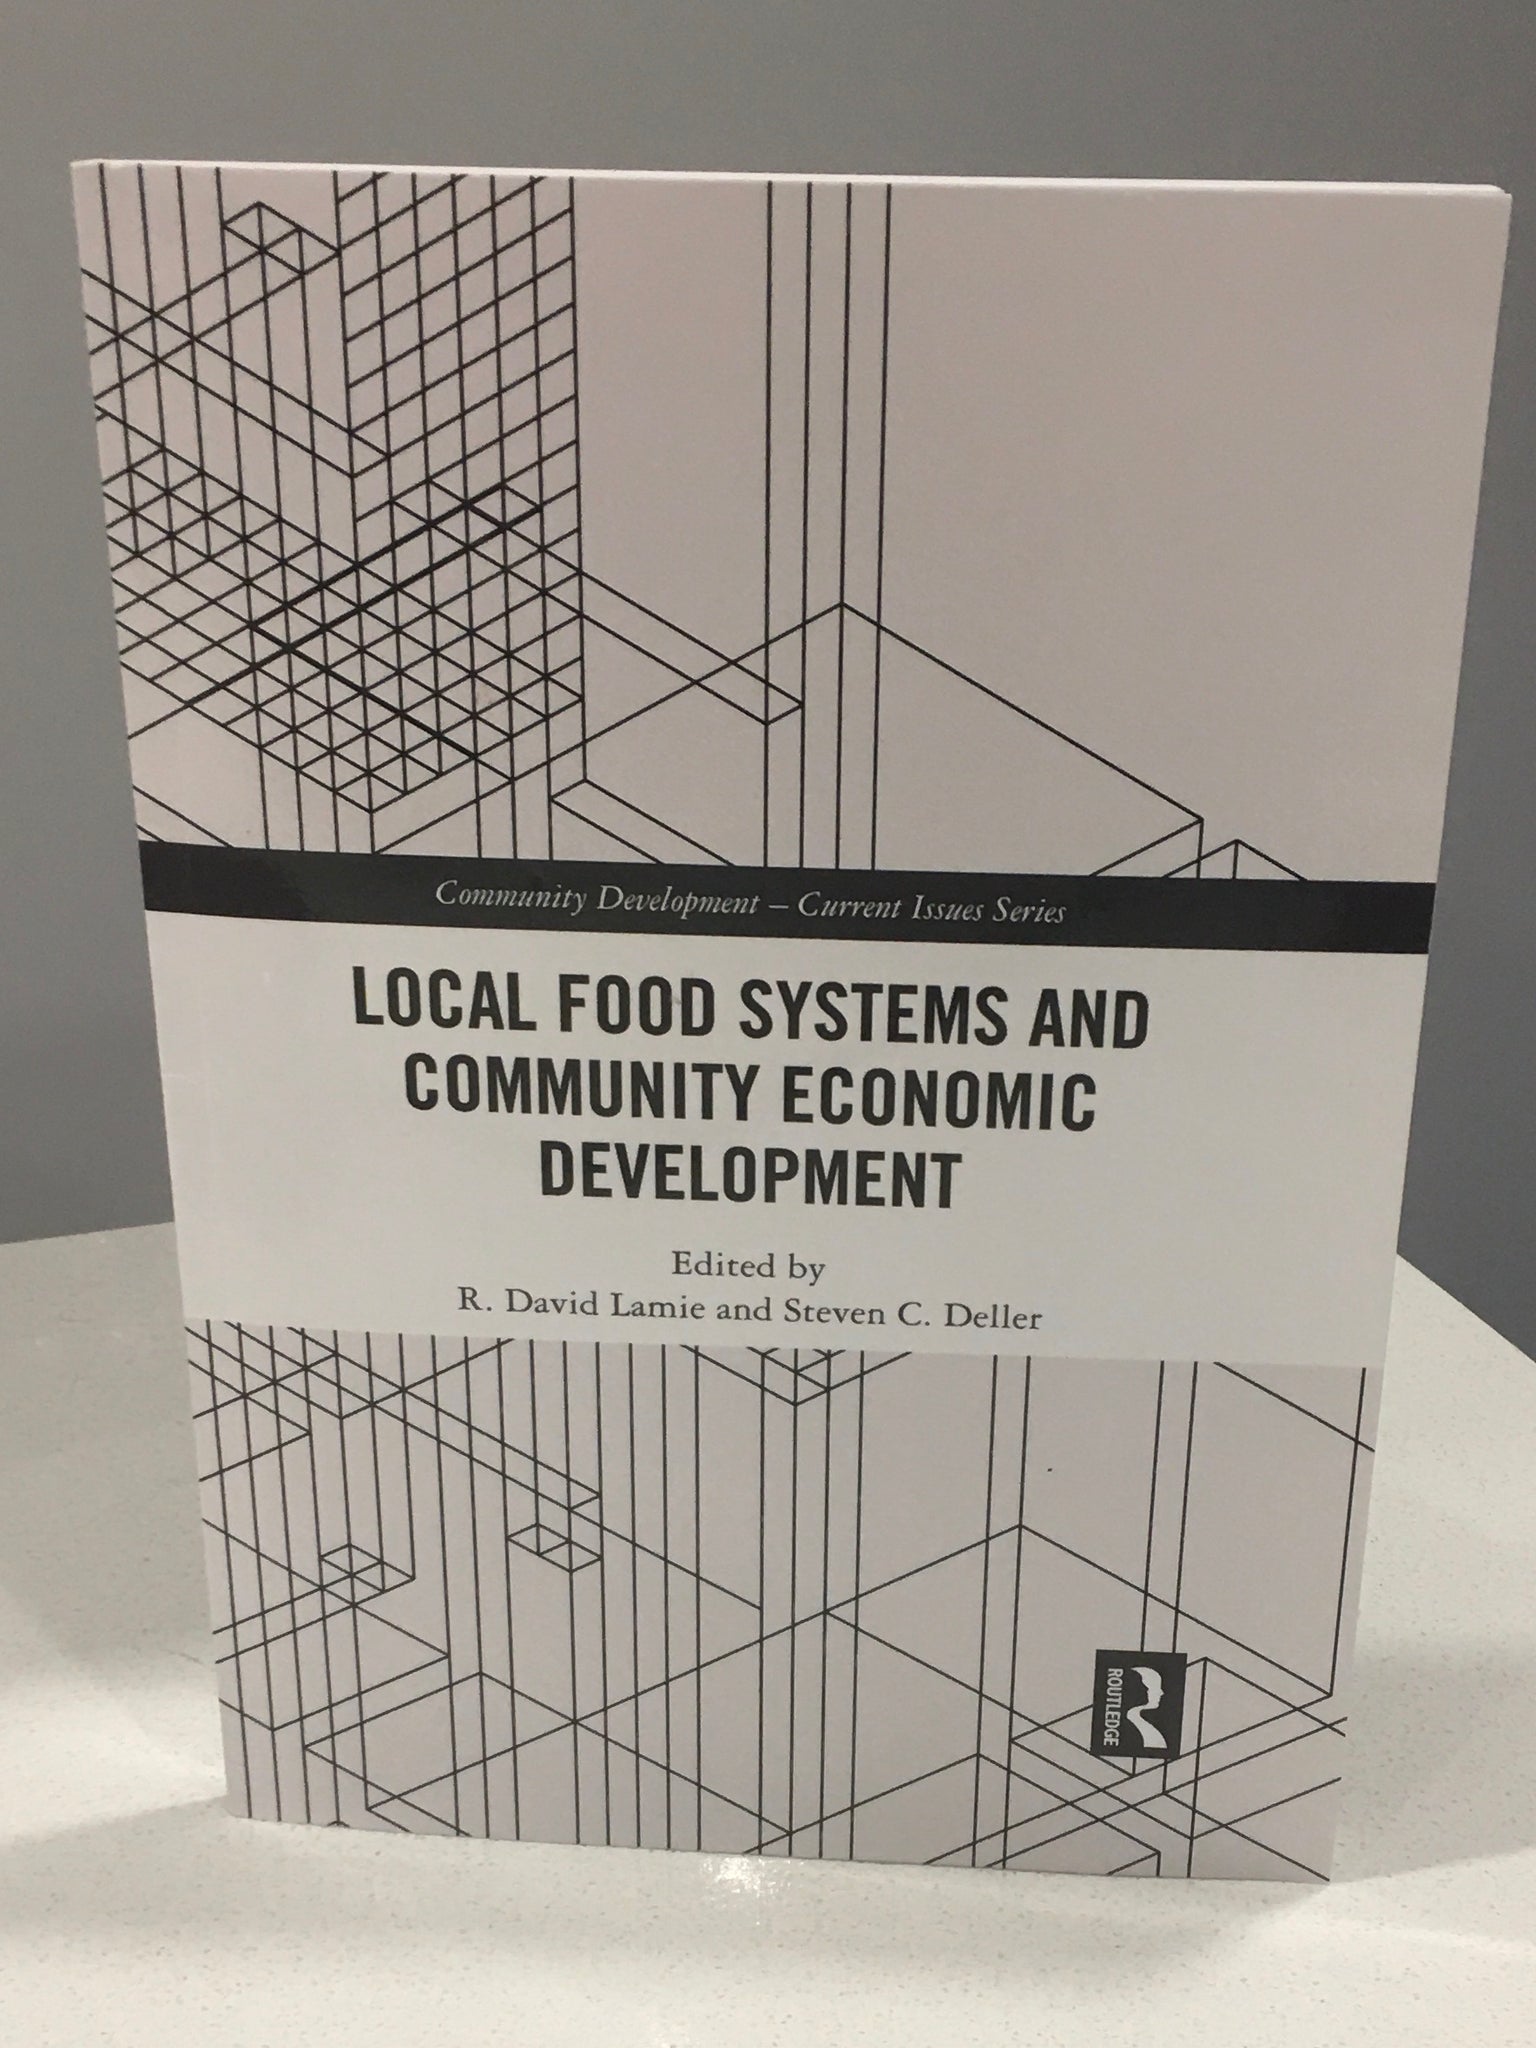 Local Food Systems and Community Economic Development - Current Issues eries